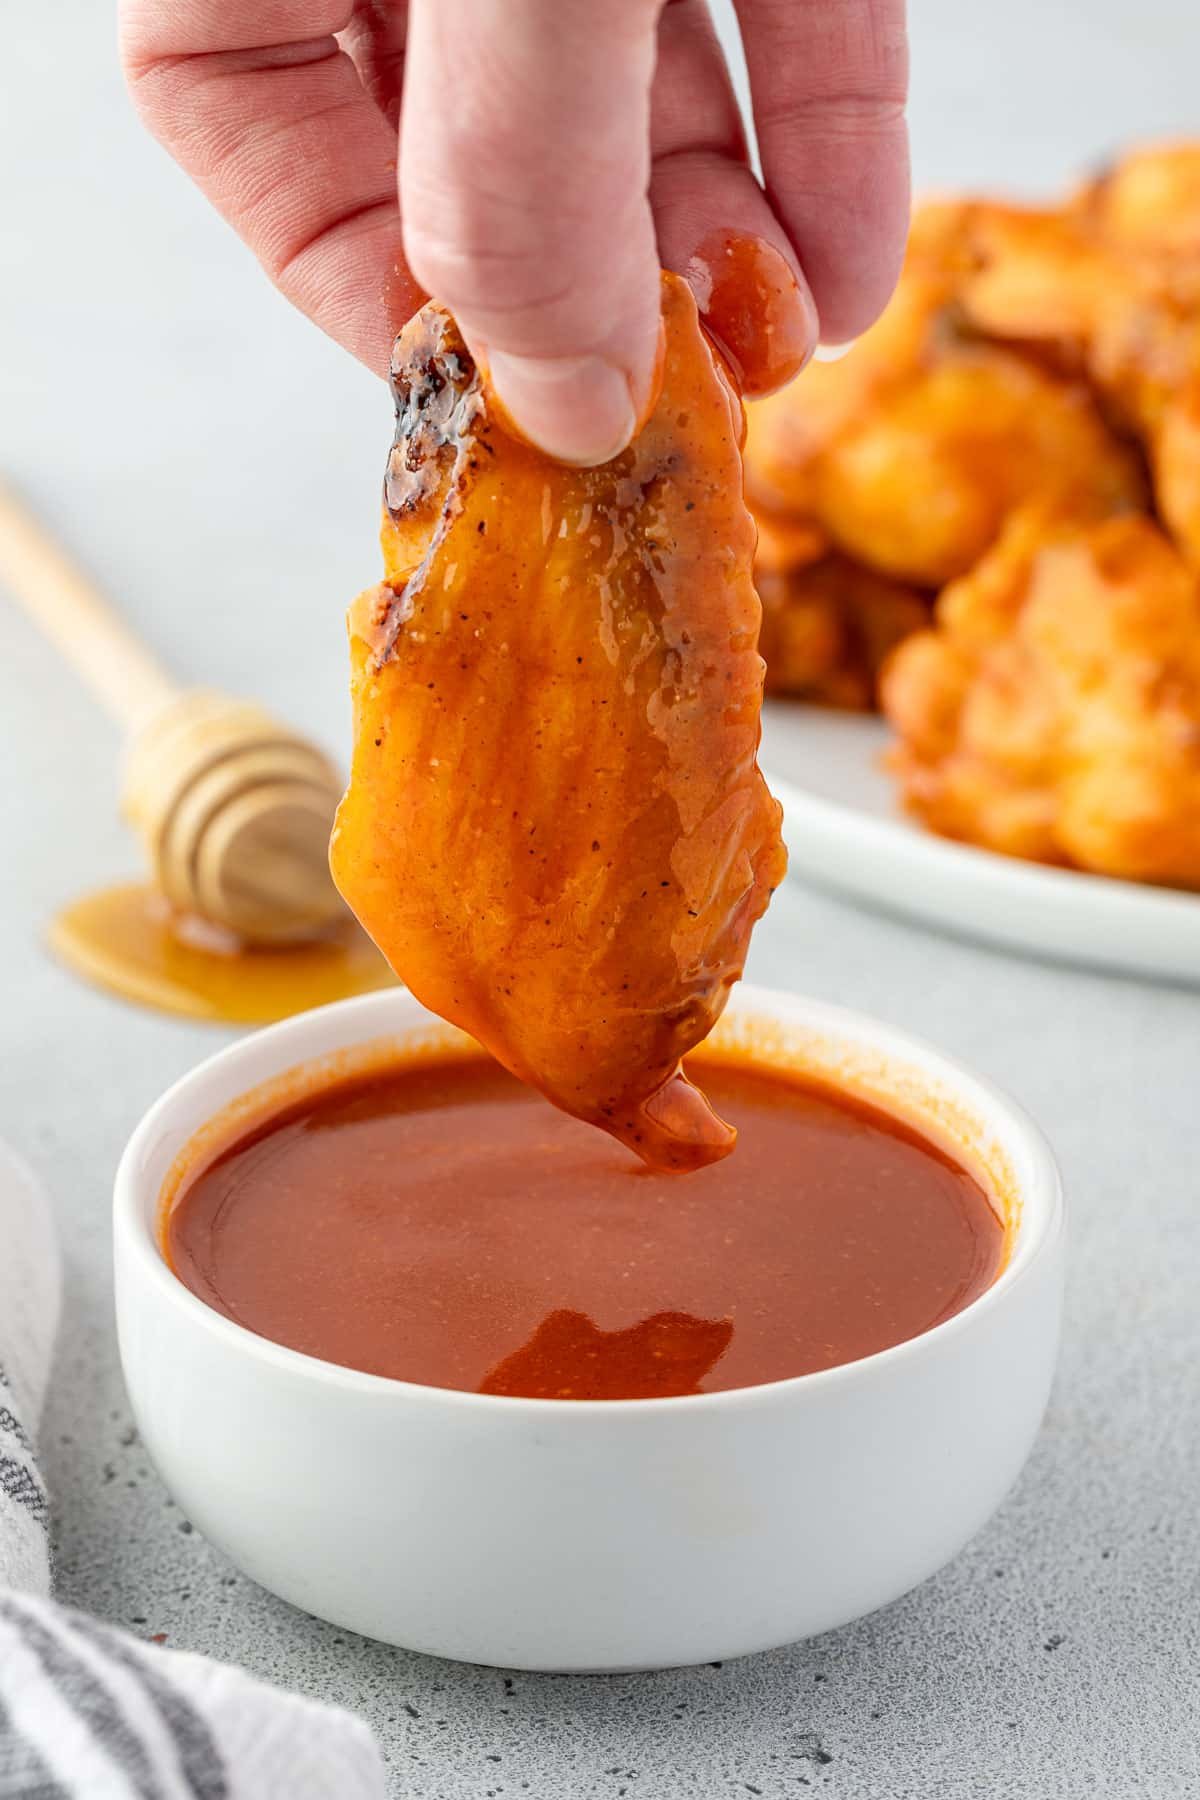 A hand holding a chicken wing and dipping it into a bowl of sauce.